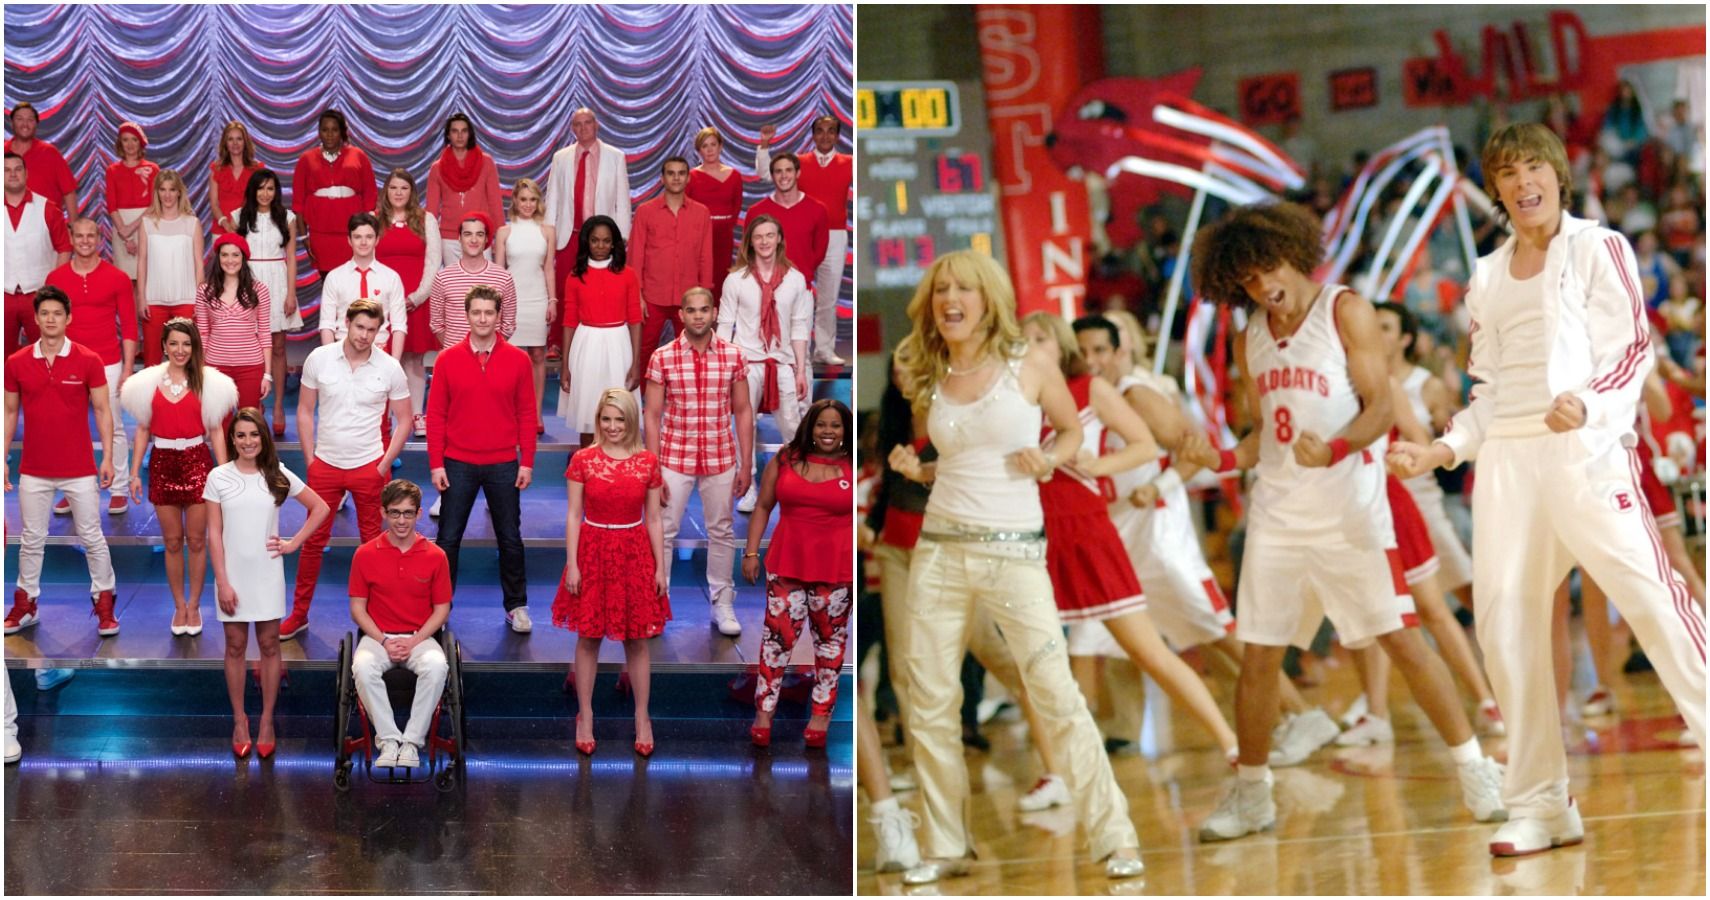 5 Reasons Why Glee Is The Best Musical About High School 5 Reasons Why High School Musical Is Better